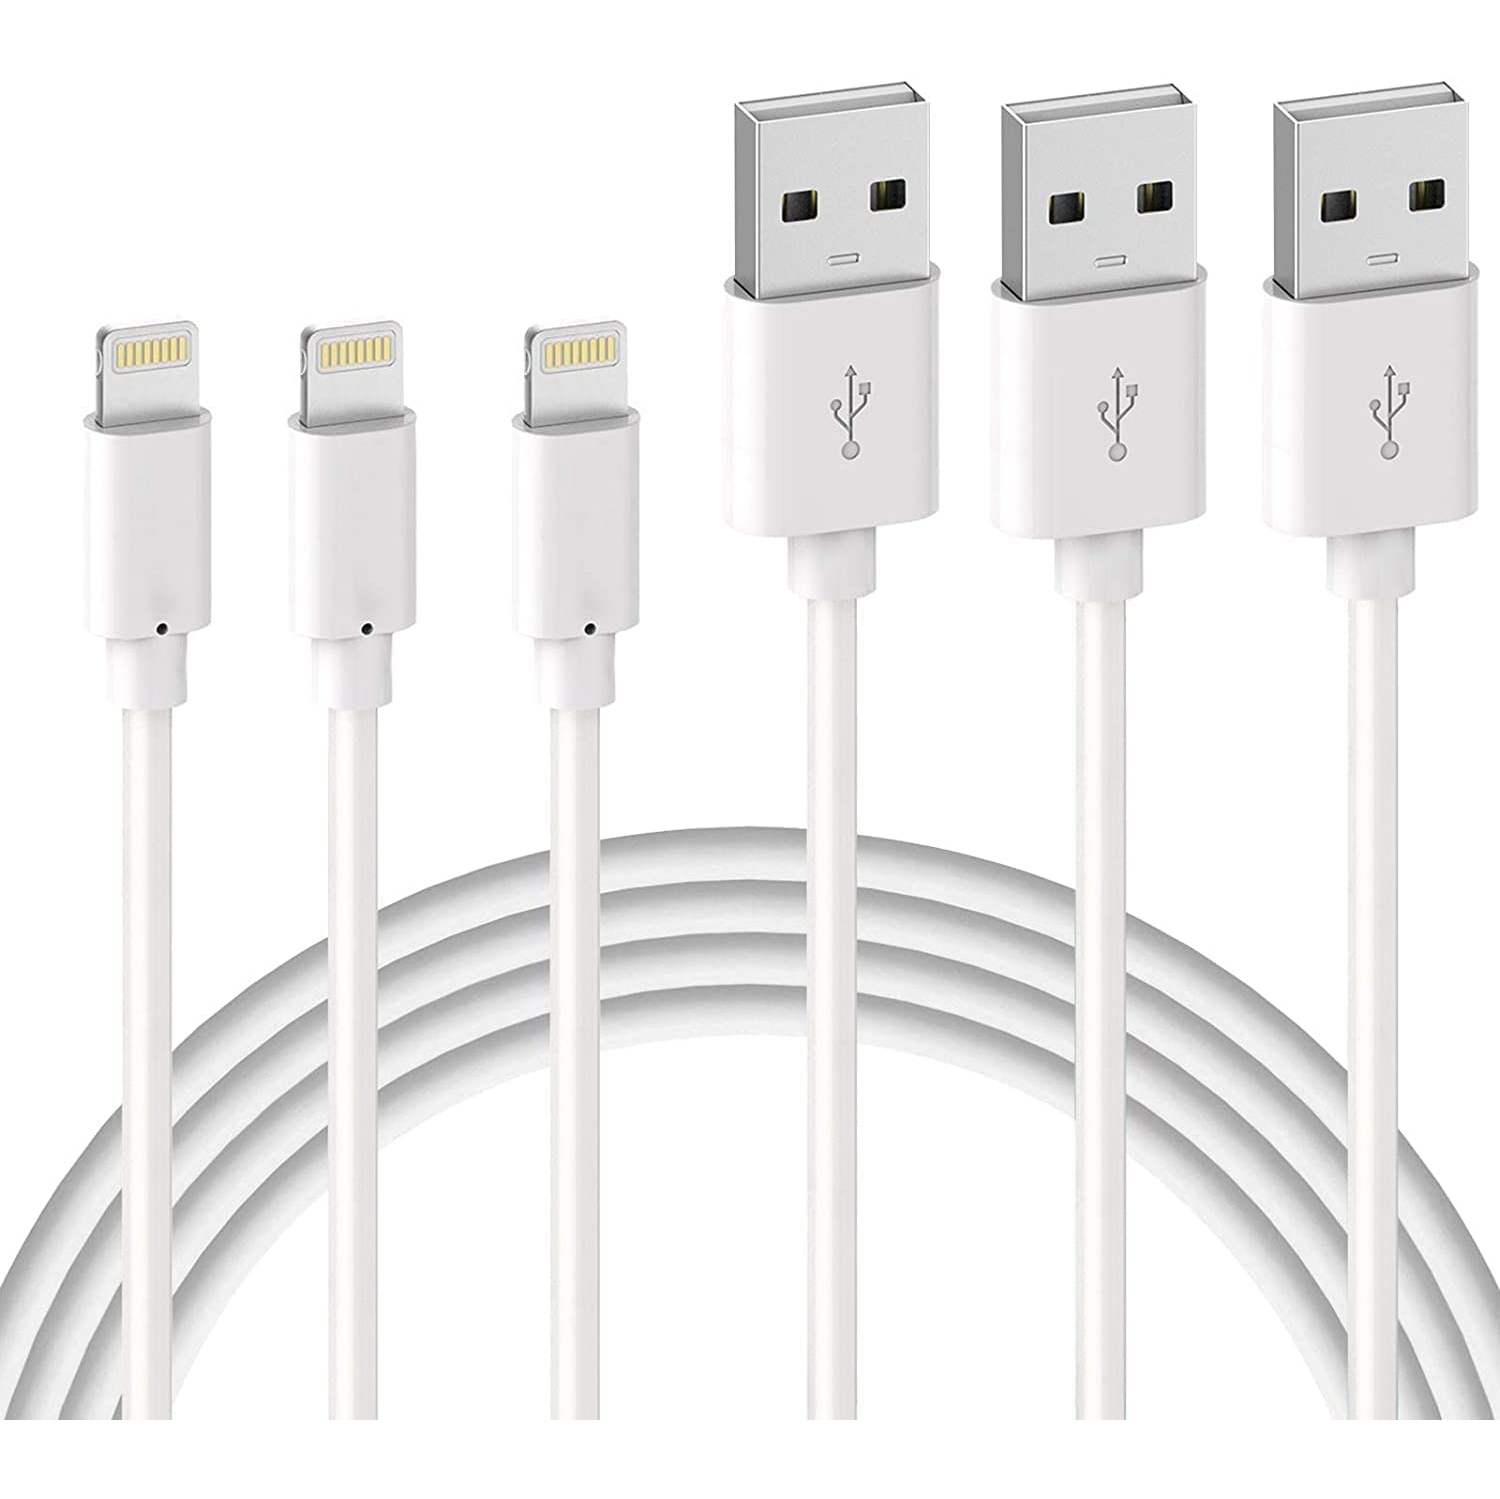 Q Lightning Cable MFi Certified, 3 Pack 3ft Lightning to USB-A Cable for iPhone Charger Compatible with iPhone 13 12 11 pro max 11 pro Xs Max XR X 8 Plus 7 Plus 6 Plus 5s SE iPad